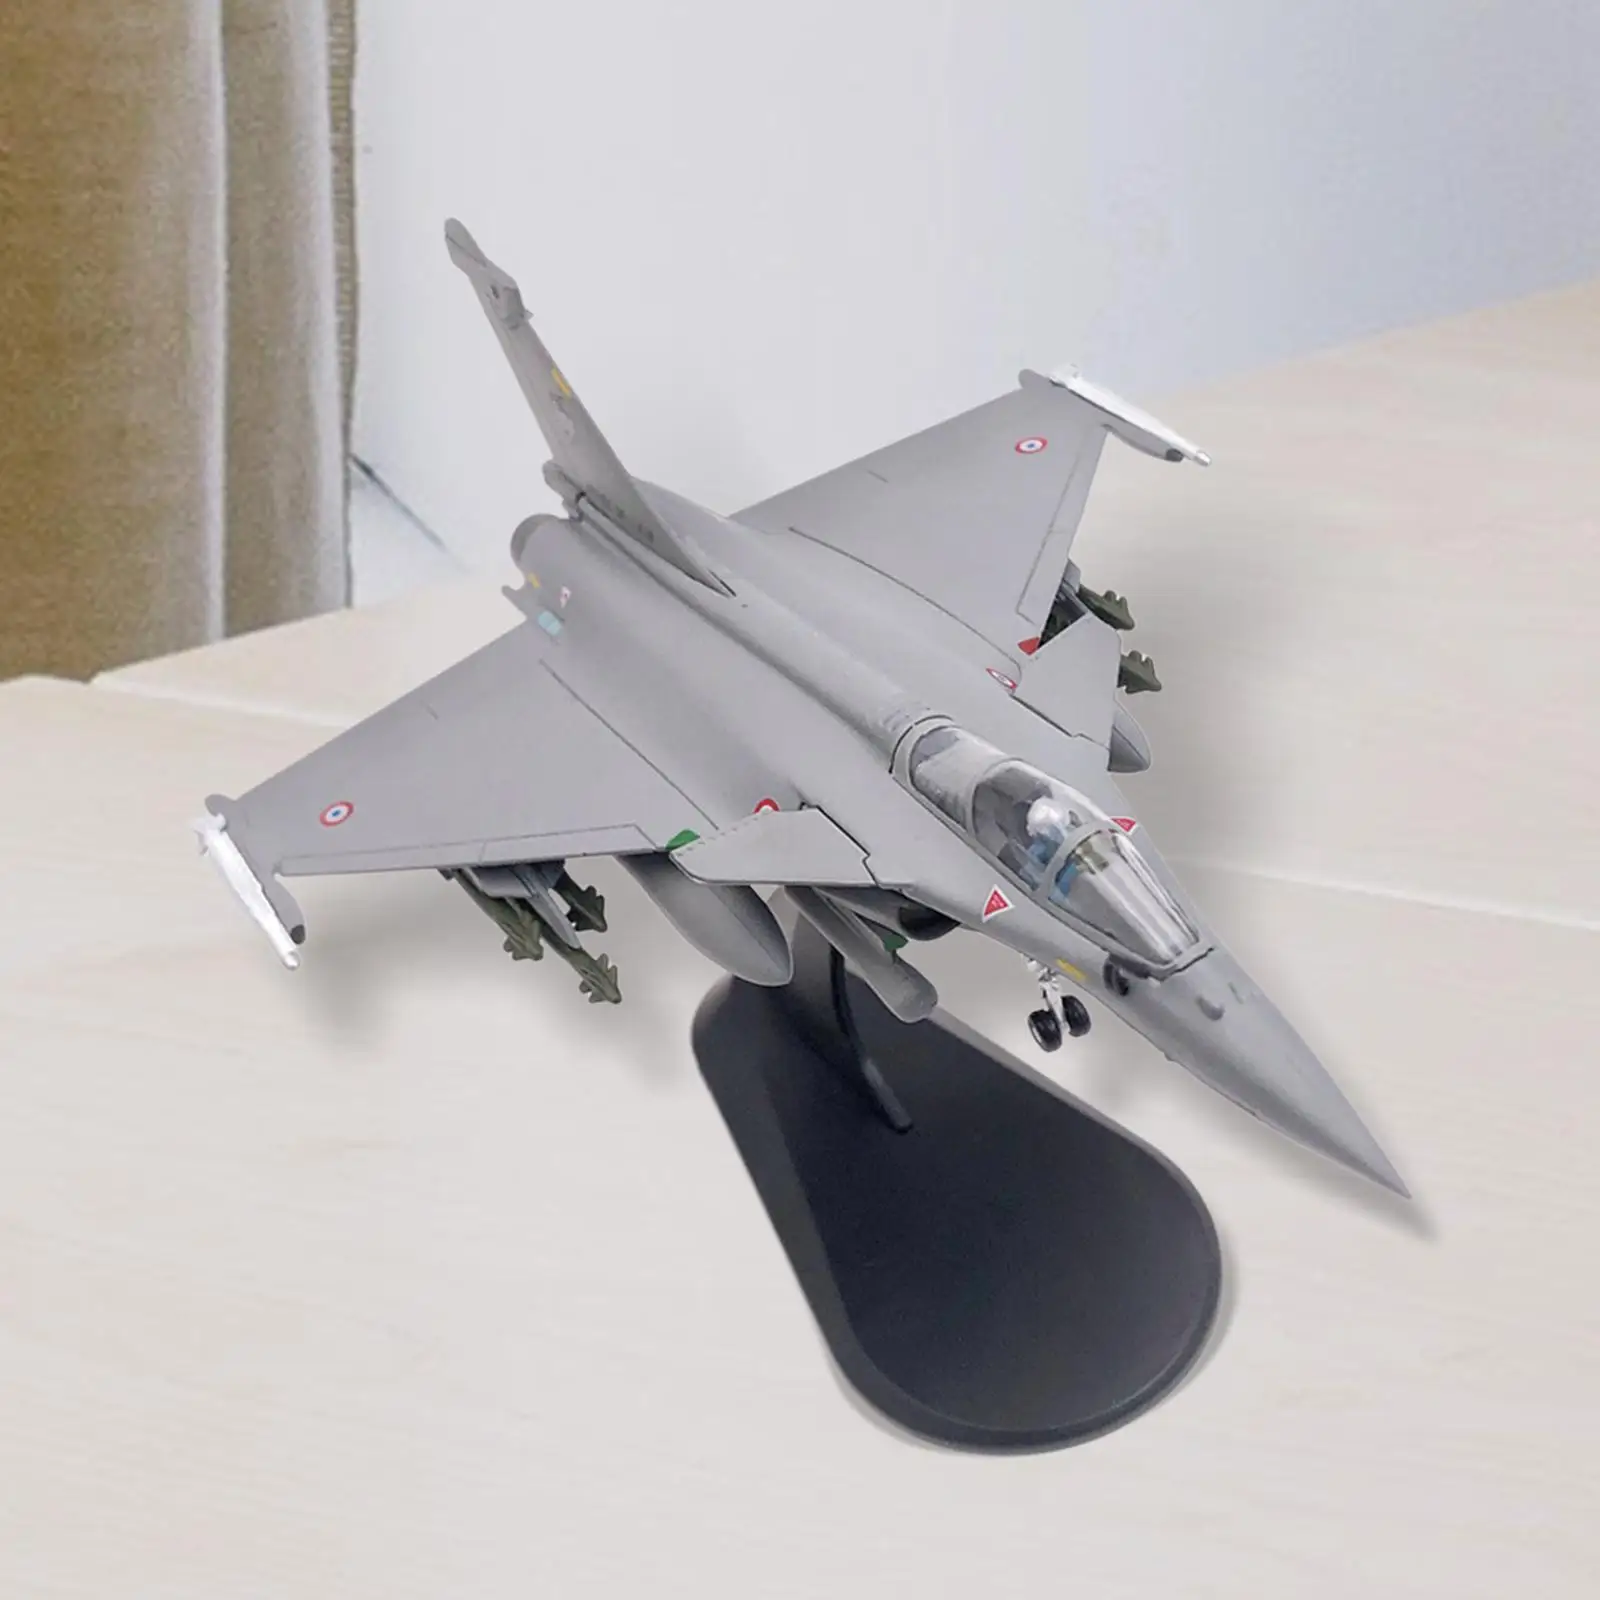 1/100 Scale French Plane Model Simulation Aircraft Model with Stand Fighter Model for Shelf Home Bedroom Collectibles Decoration